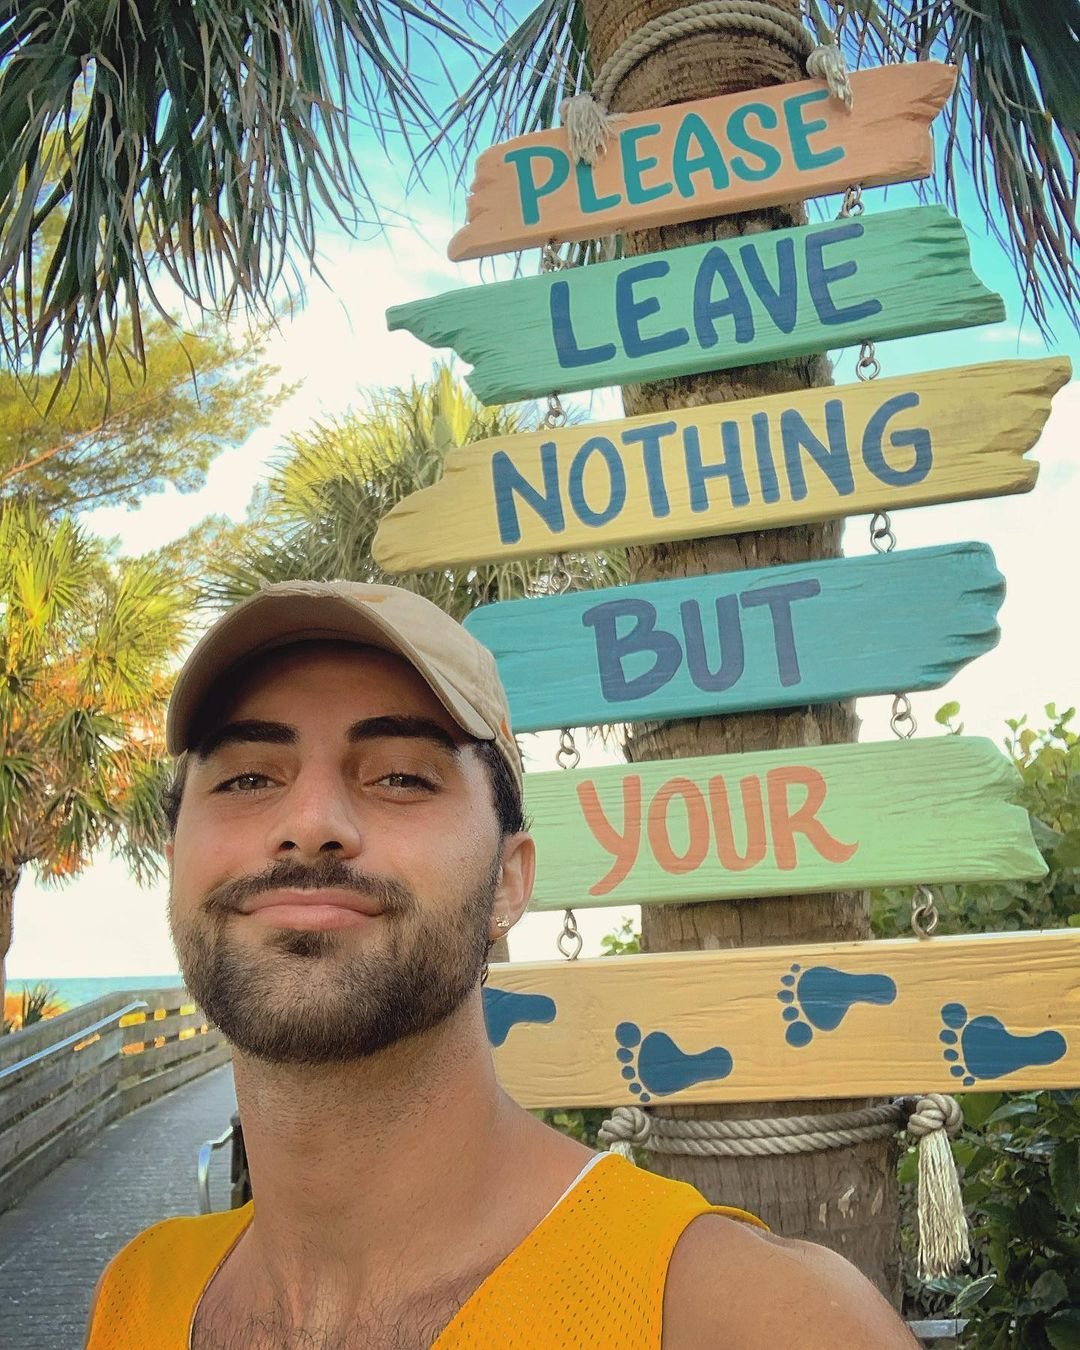 Man wearing a yellow cap smiling in front of a wooden sign that reads "please leave nothing but your feet"